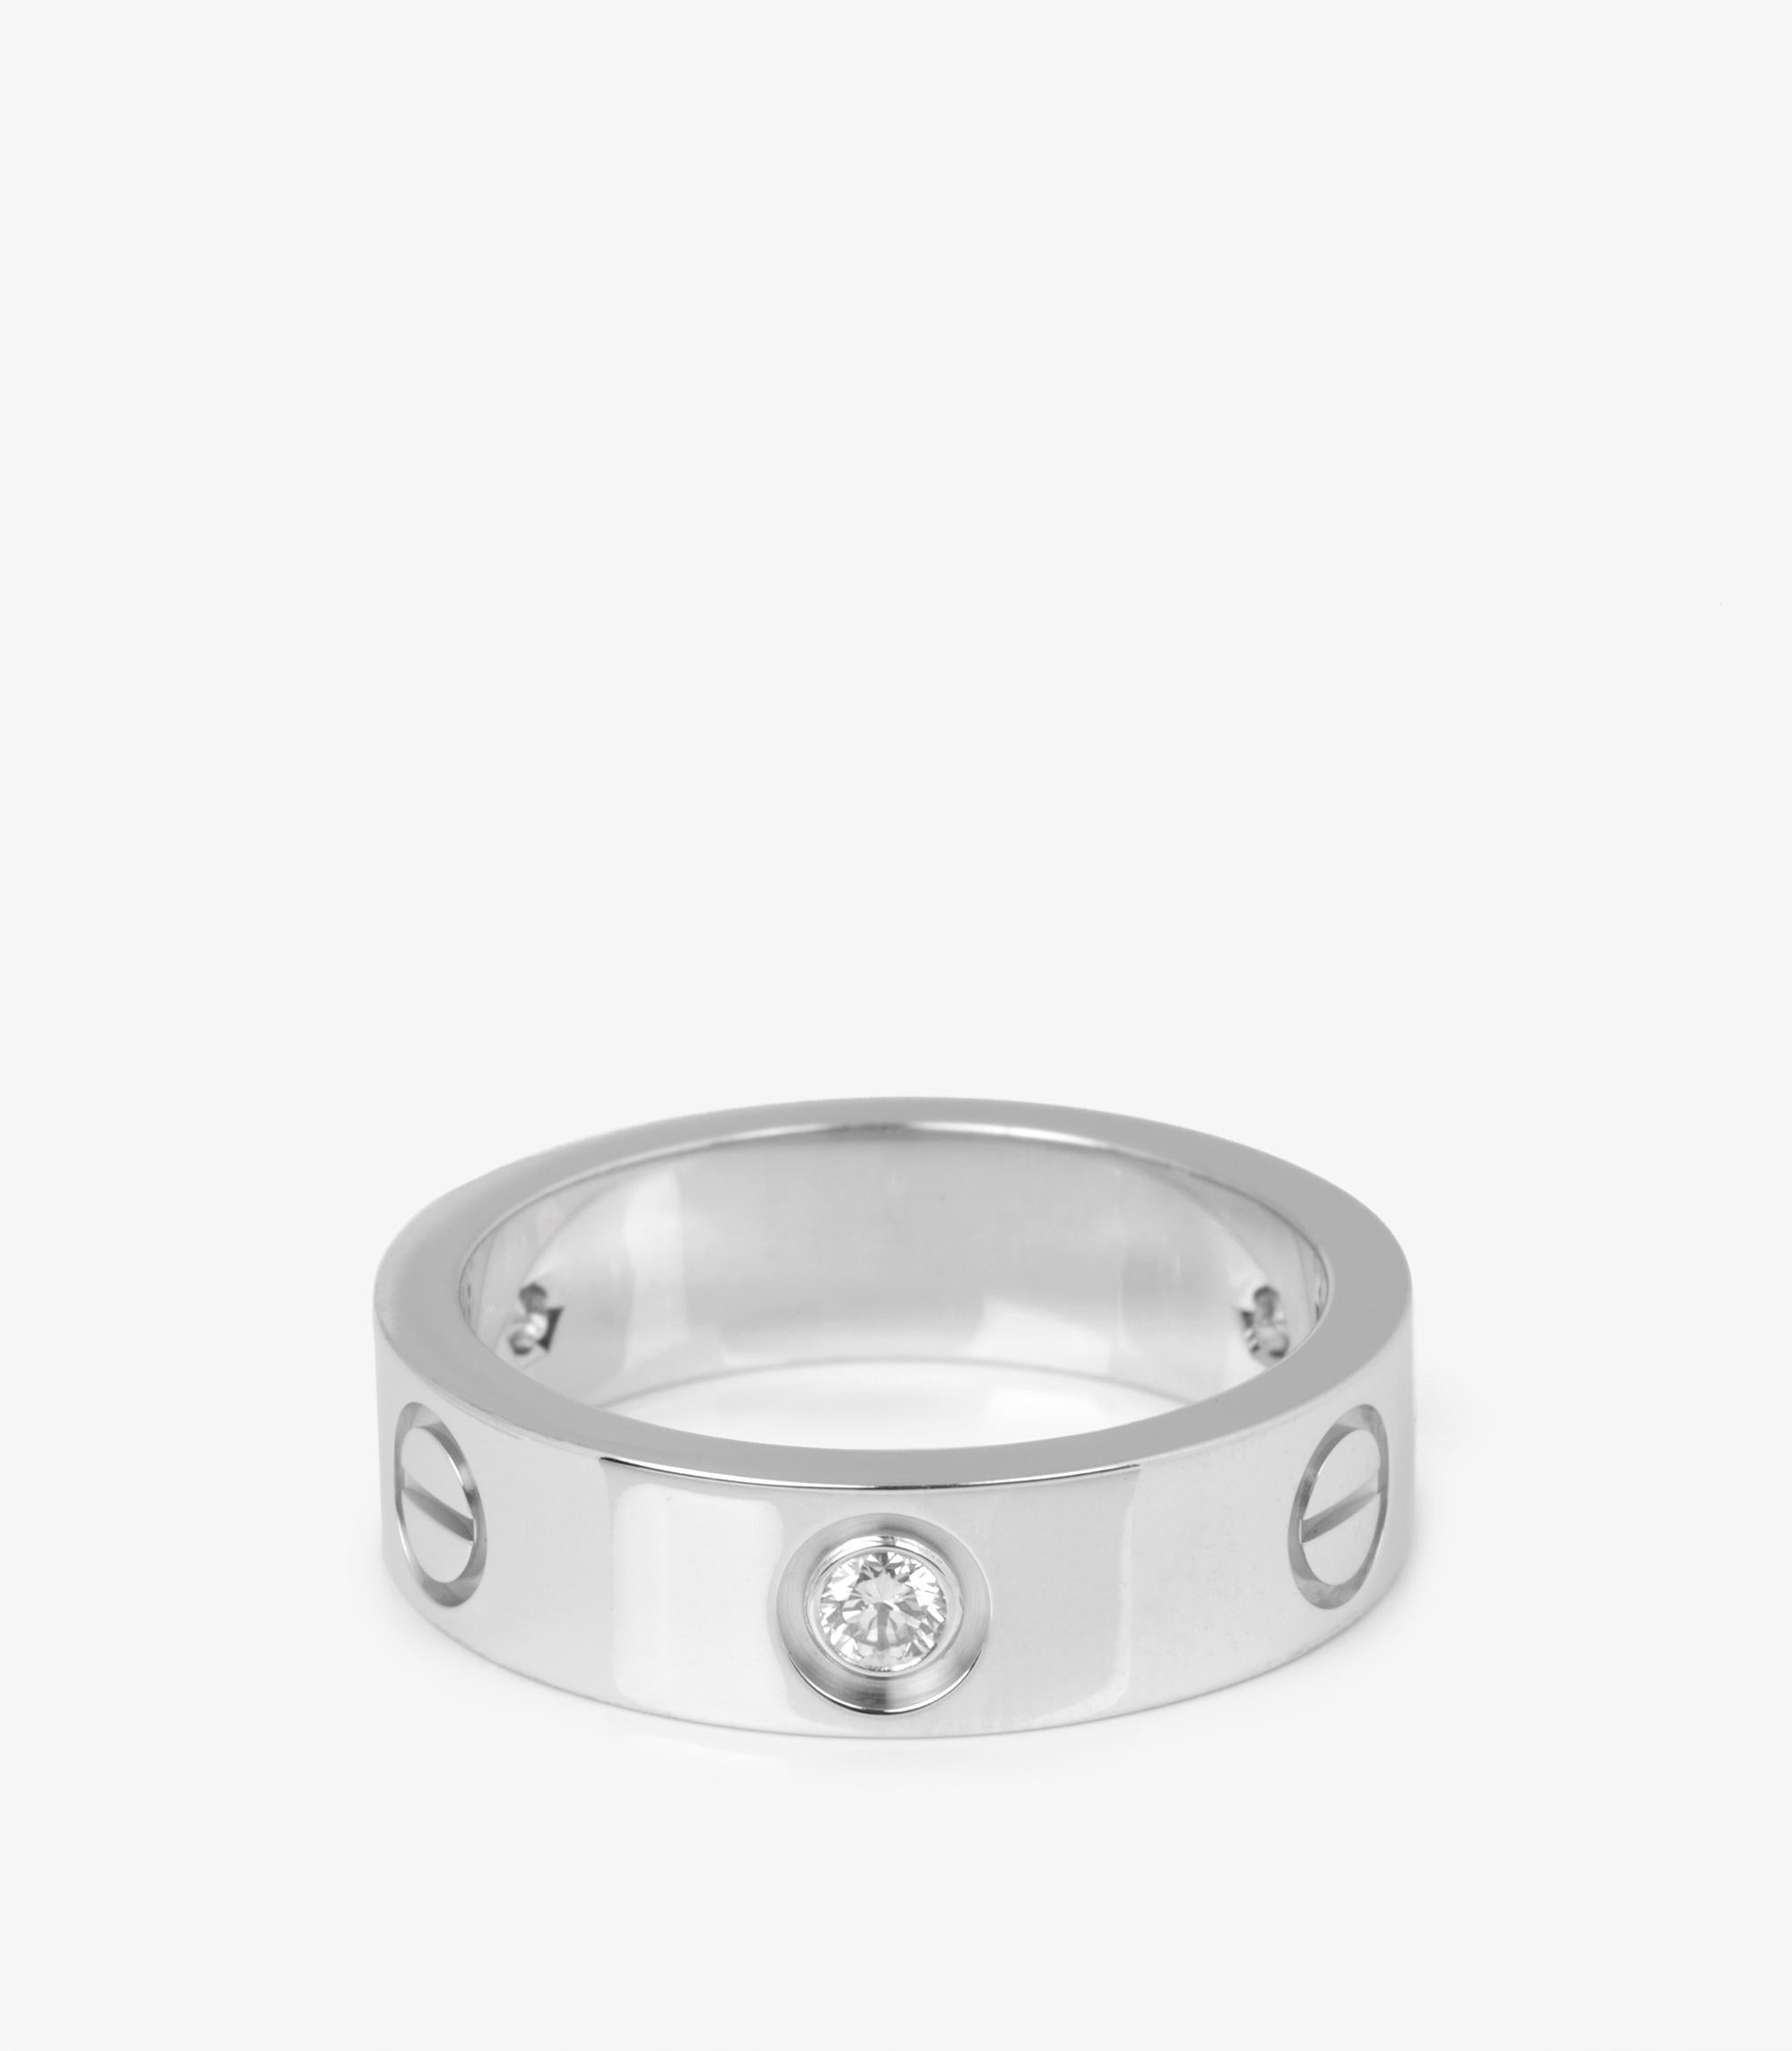 Cartier 3 Diamond 18ct White Gold Love Band Ring

Brand- Cartier
Model- 3 Diamond Love Band Ring
Product Type- Ring
Serial Number- QS****
Age- Circa 2022
Accompanied By- Cartier Box, Certificate
Material(s)- 18ct White Gold
Gemstone- Diamond
UK Ring